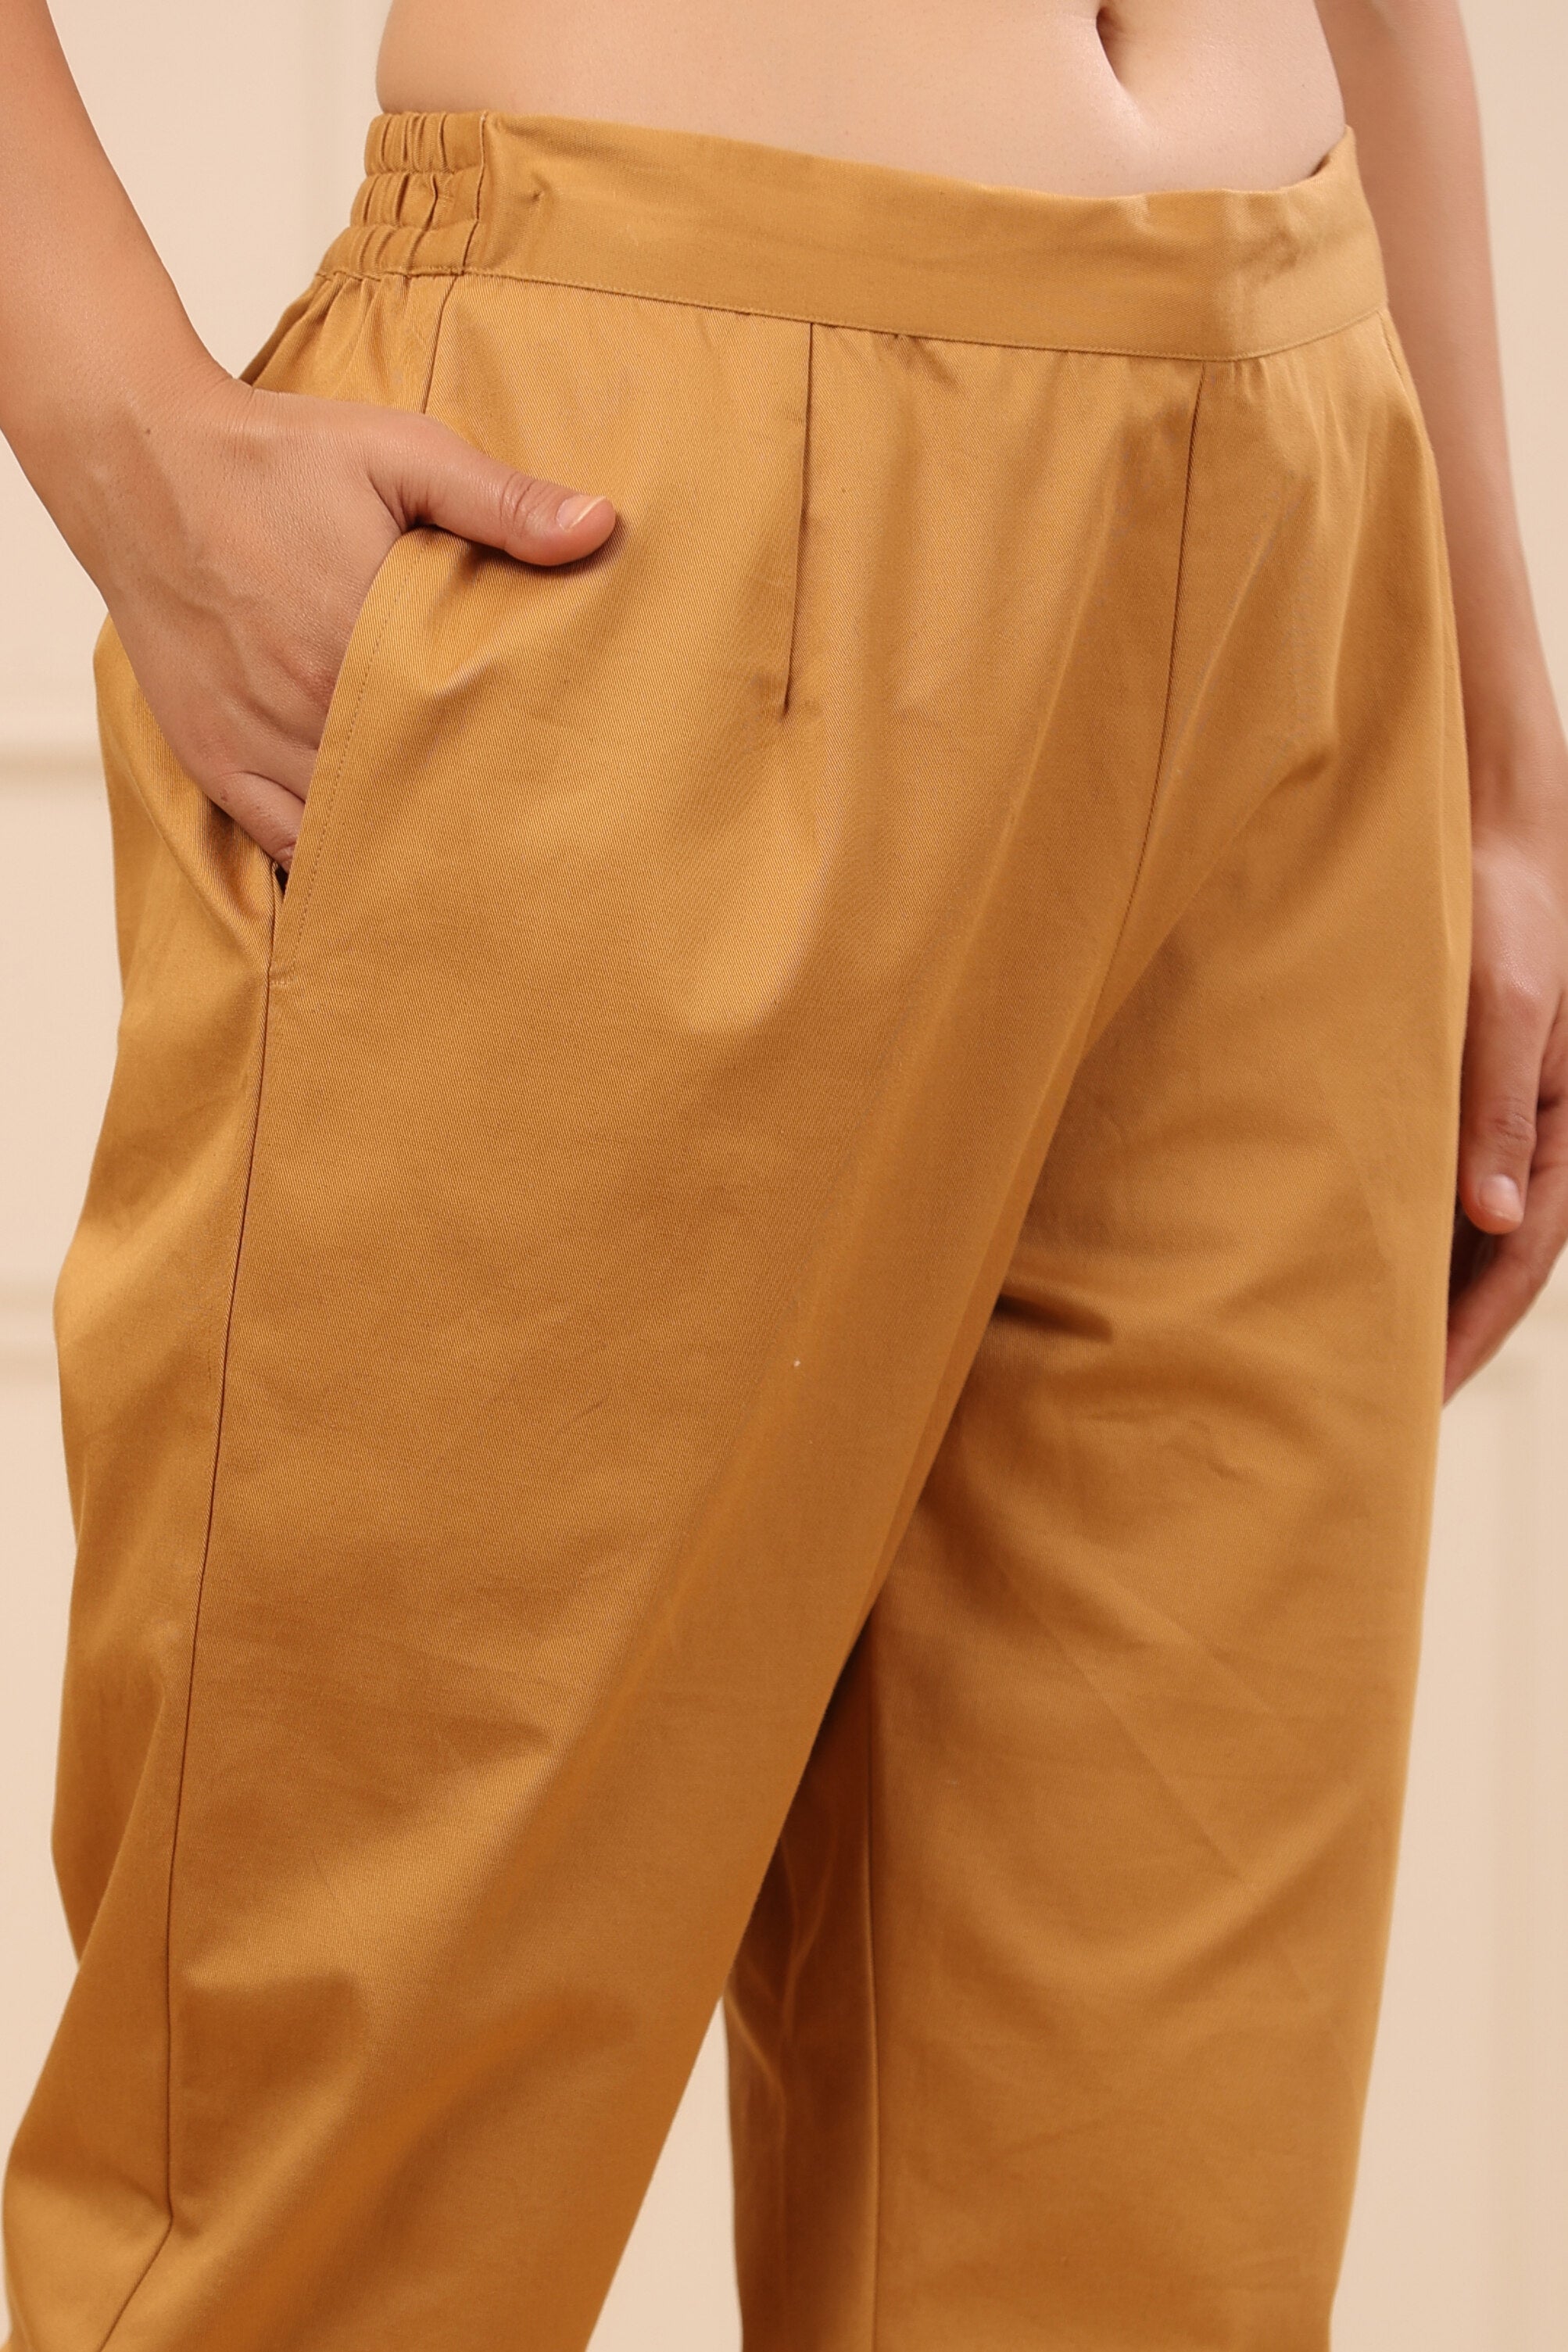 Cotton 34 Trousers - Get Best Price from Manufacturers & Suppliers in India